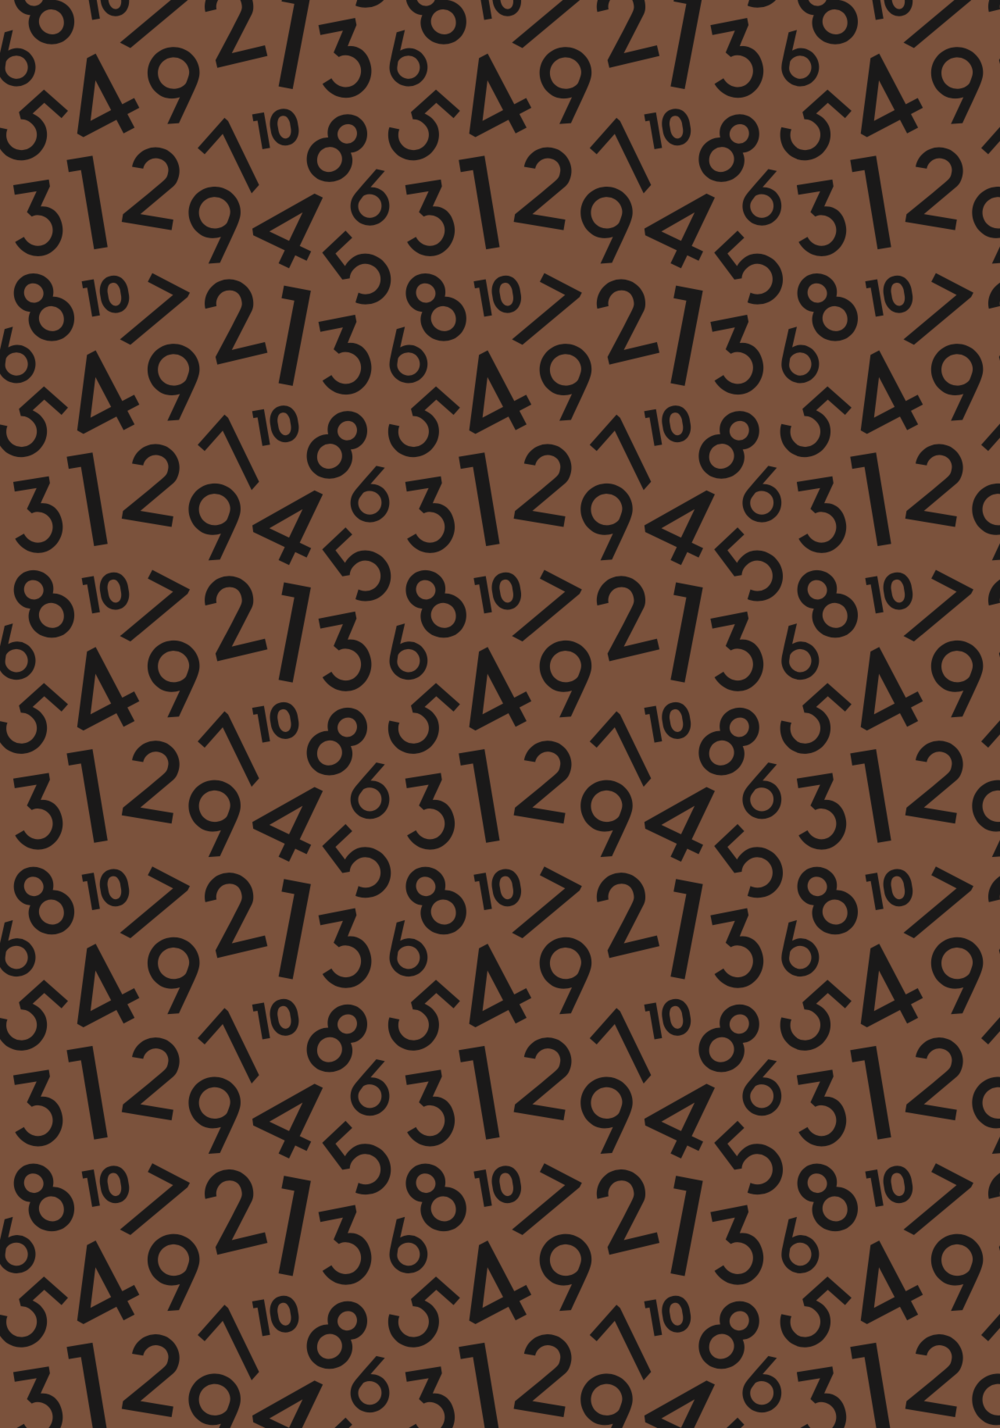 NUMBER WRAP | BROWN - 3 SHEETS